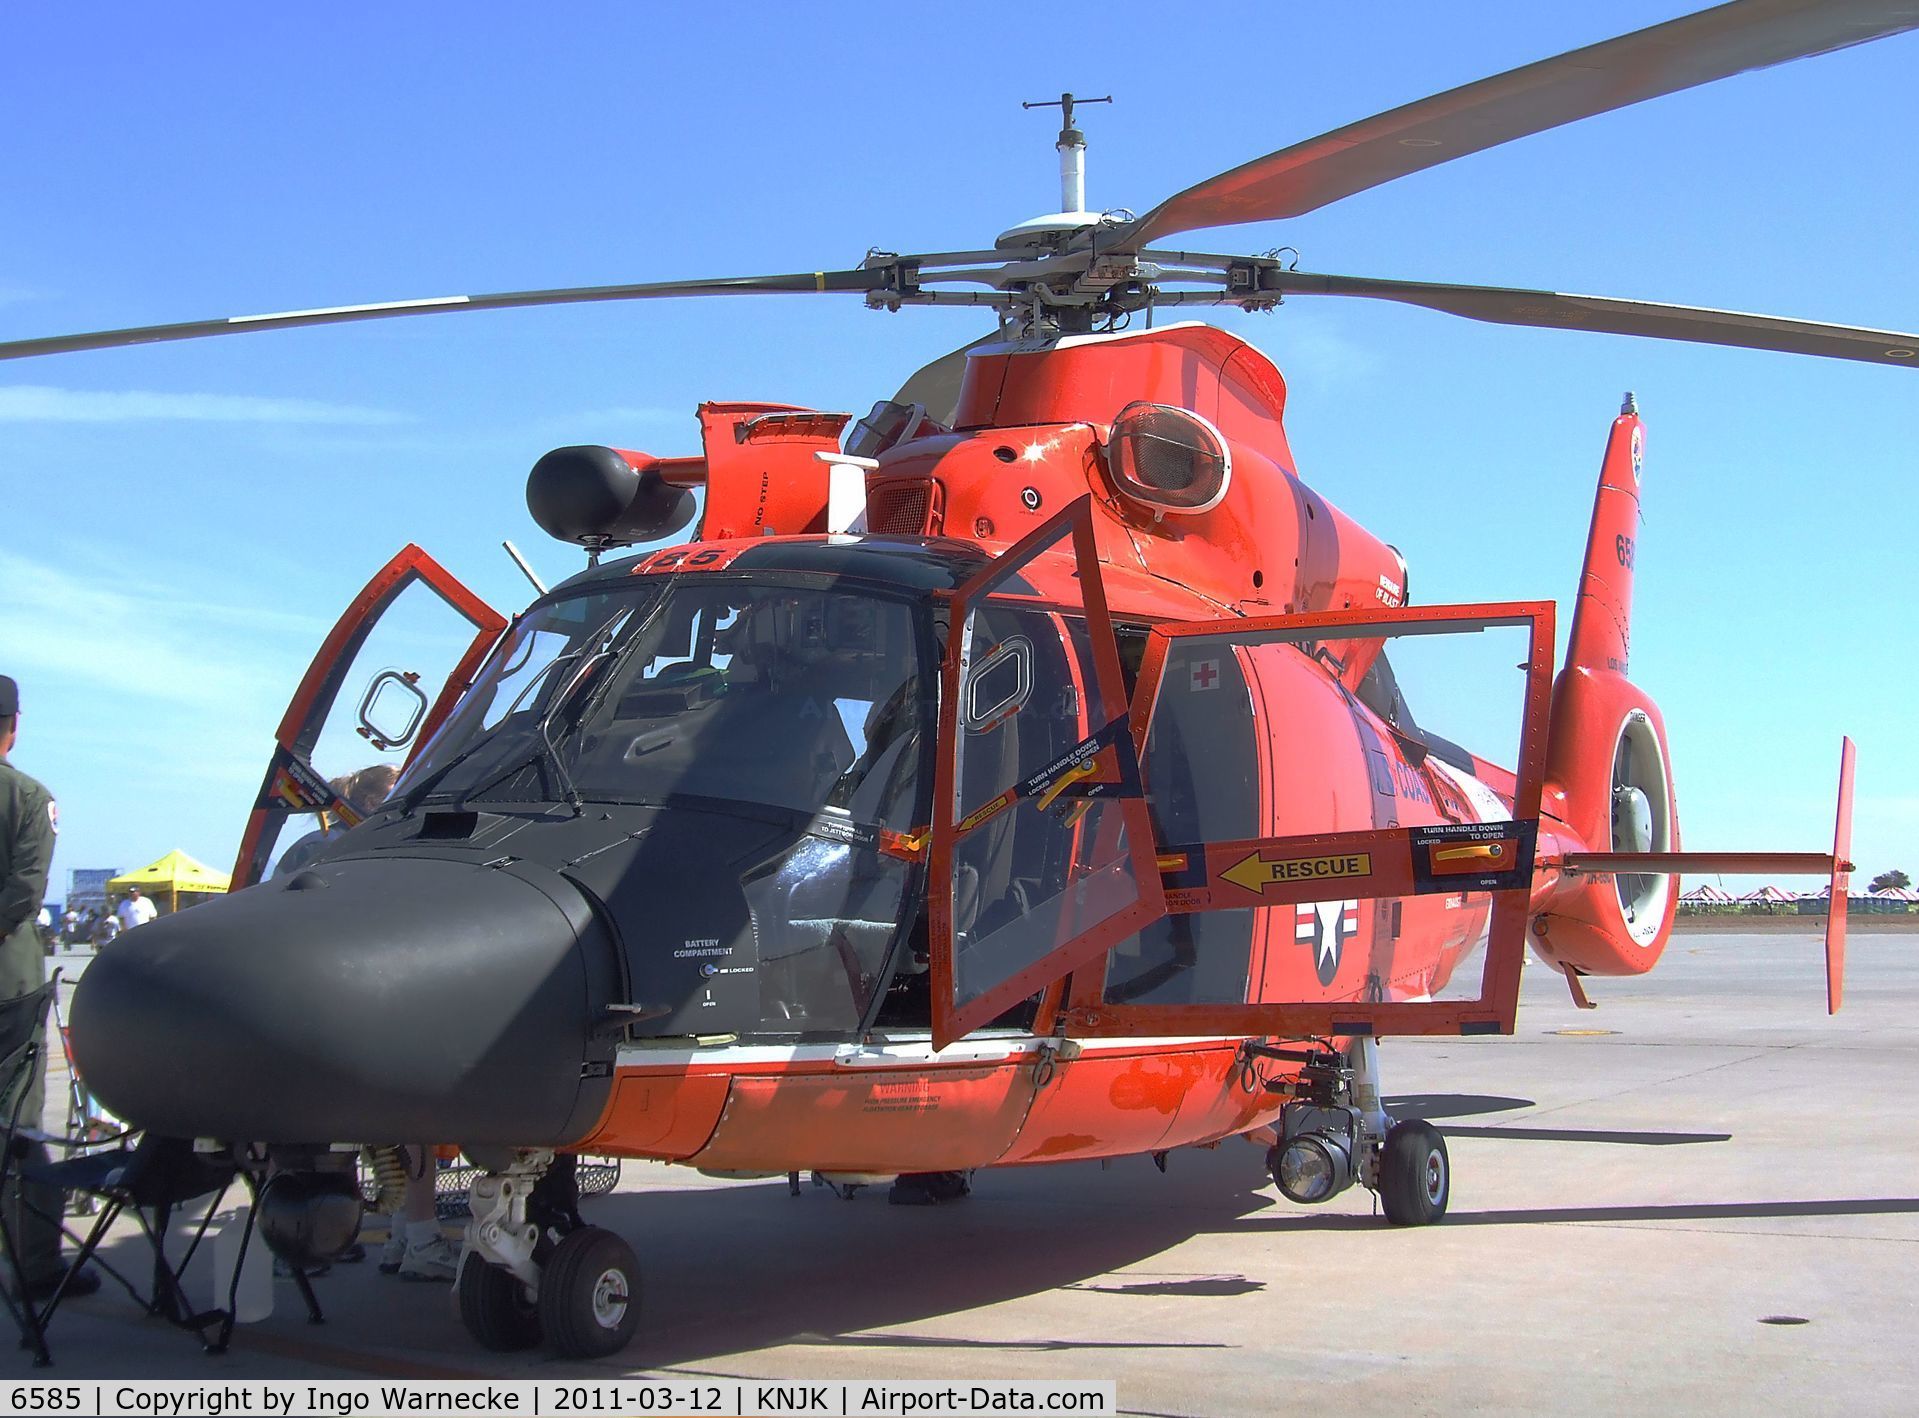 6585, 1988 Aérospatiale HH-65C Dauphin C/N 6284, Aerospatiale HH-65C Dolphin of the USCG at the 2011 airshow at El Centro NAS, CA